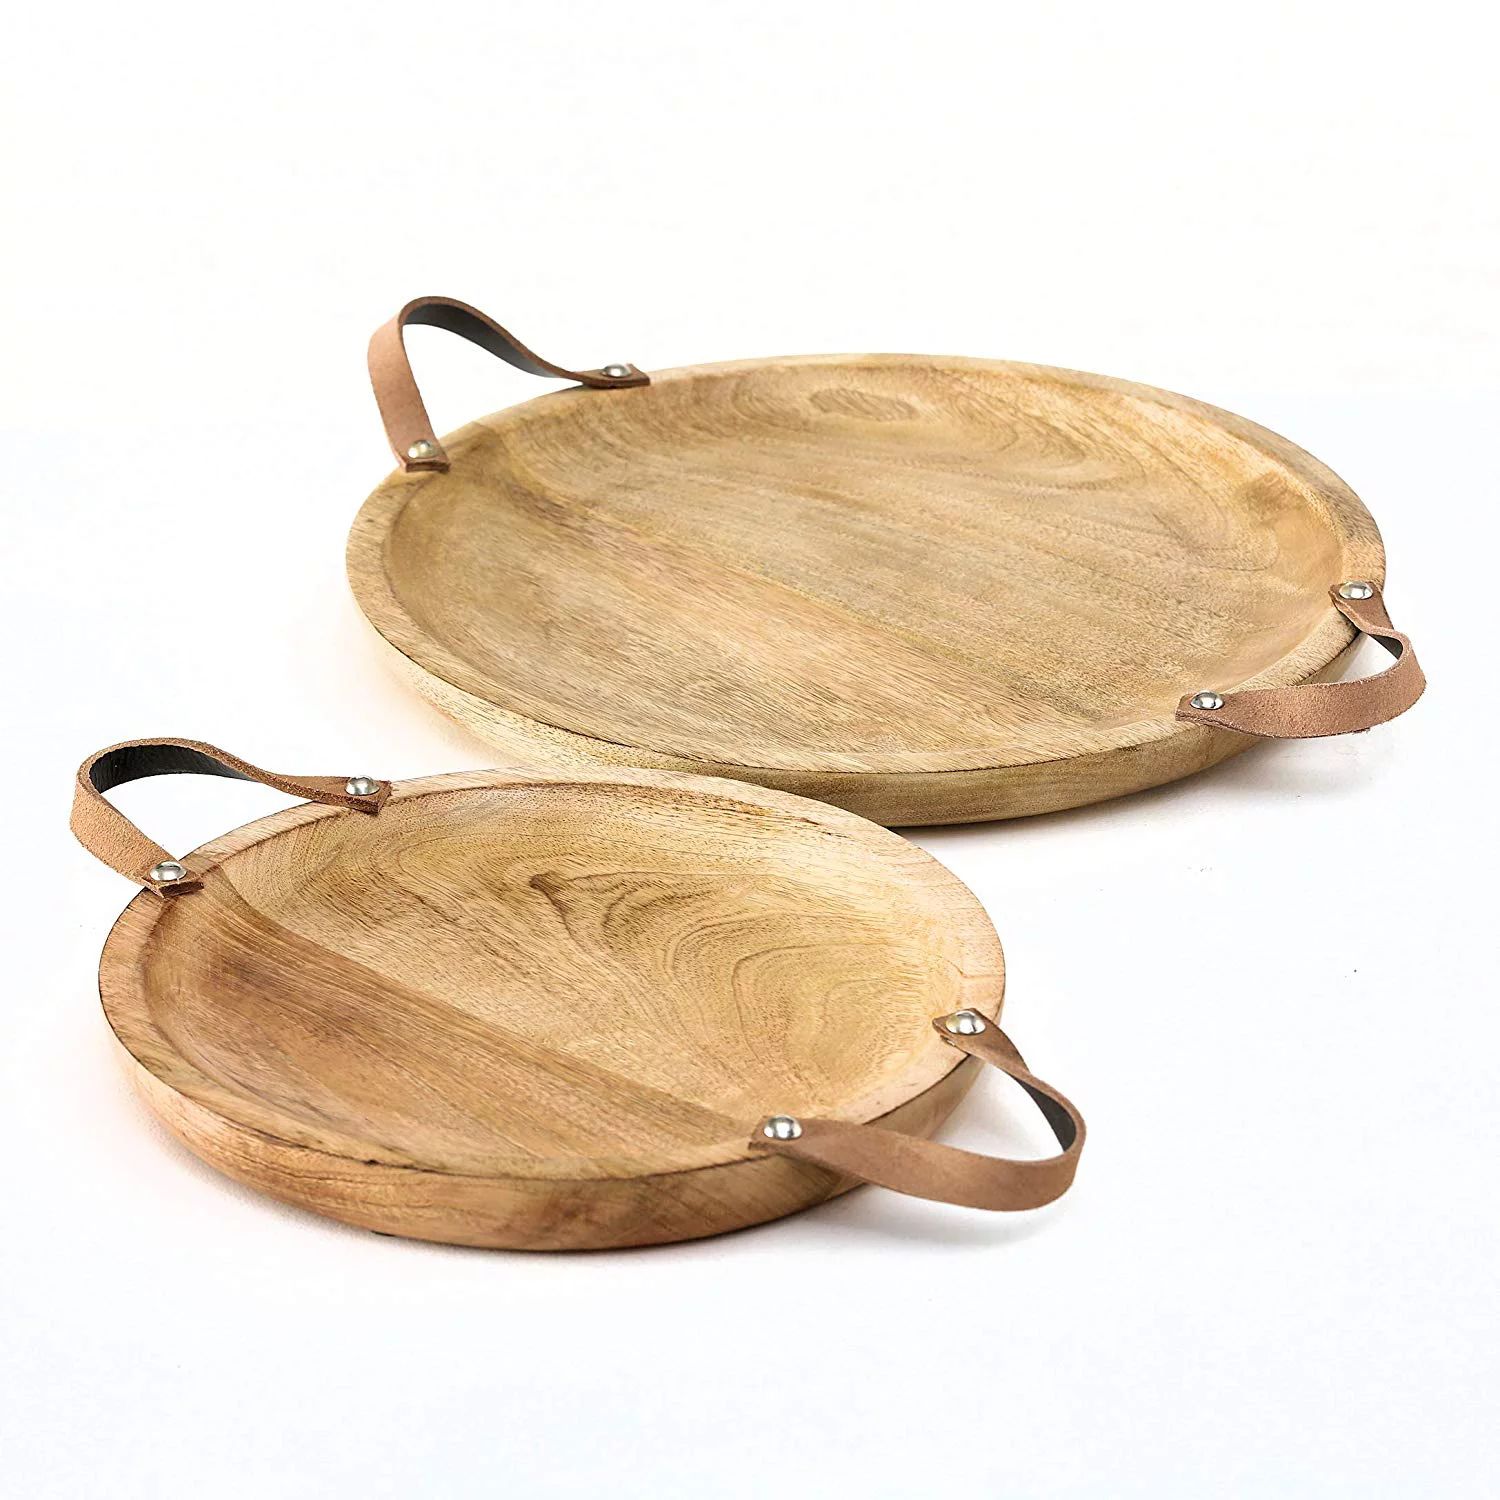 Mango Wood Board Servers, Set of 2, Brown Leather Handles, Rustic Rounds, for Cheese, Crackers, a... | Walmart (US)